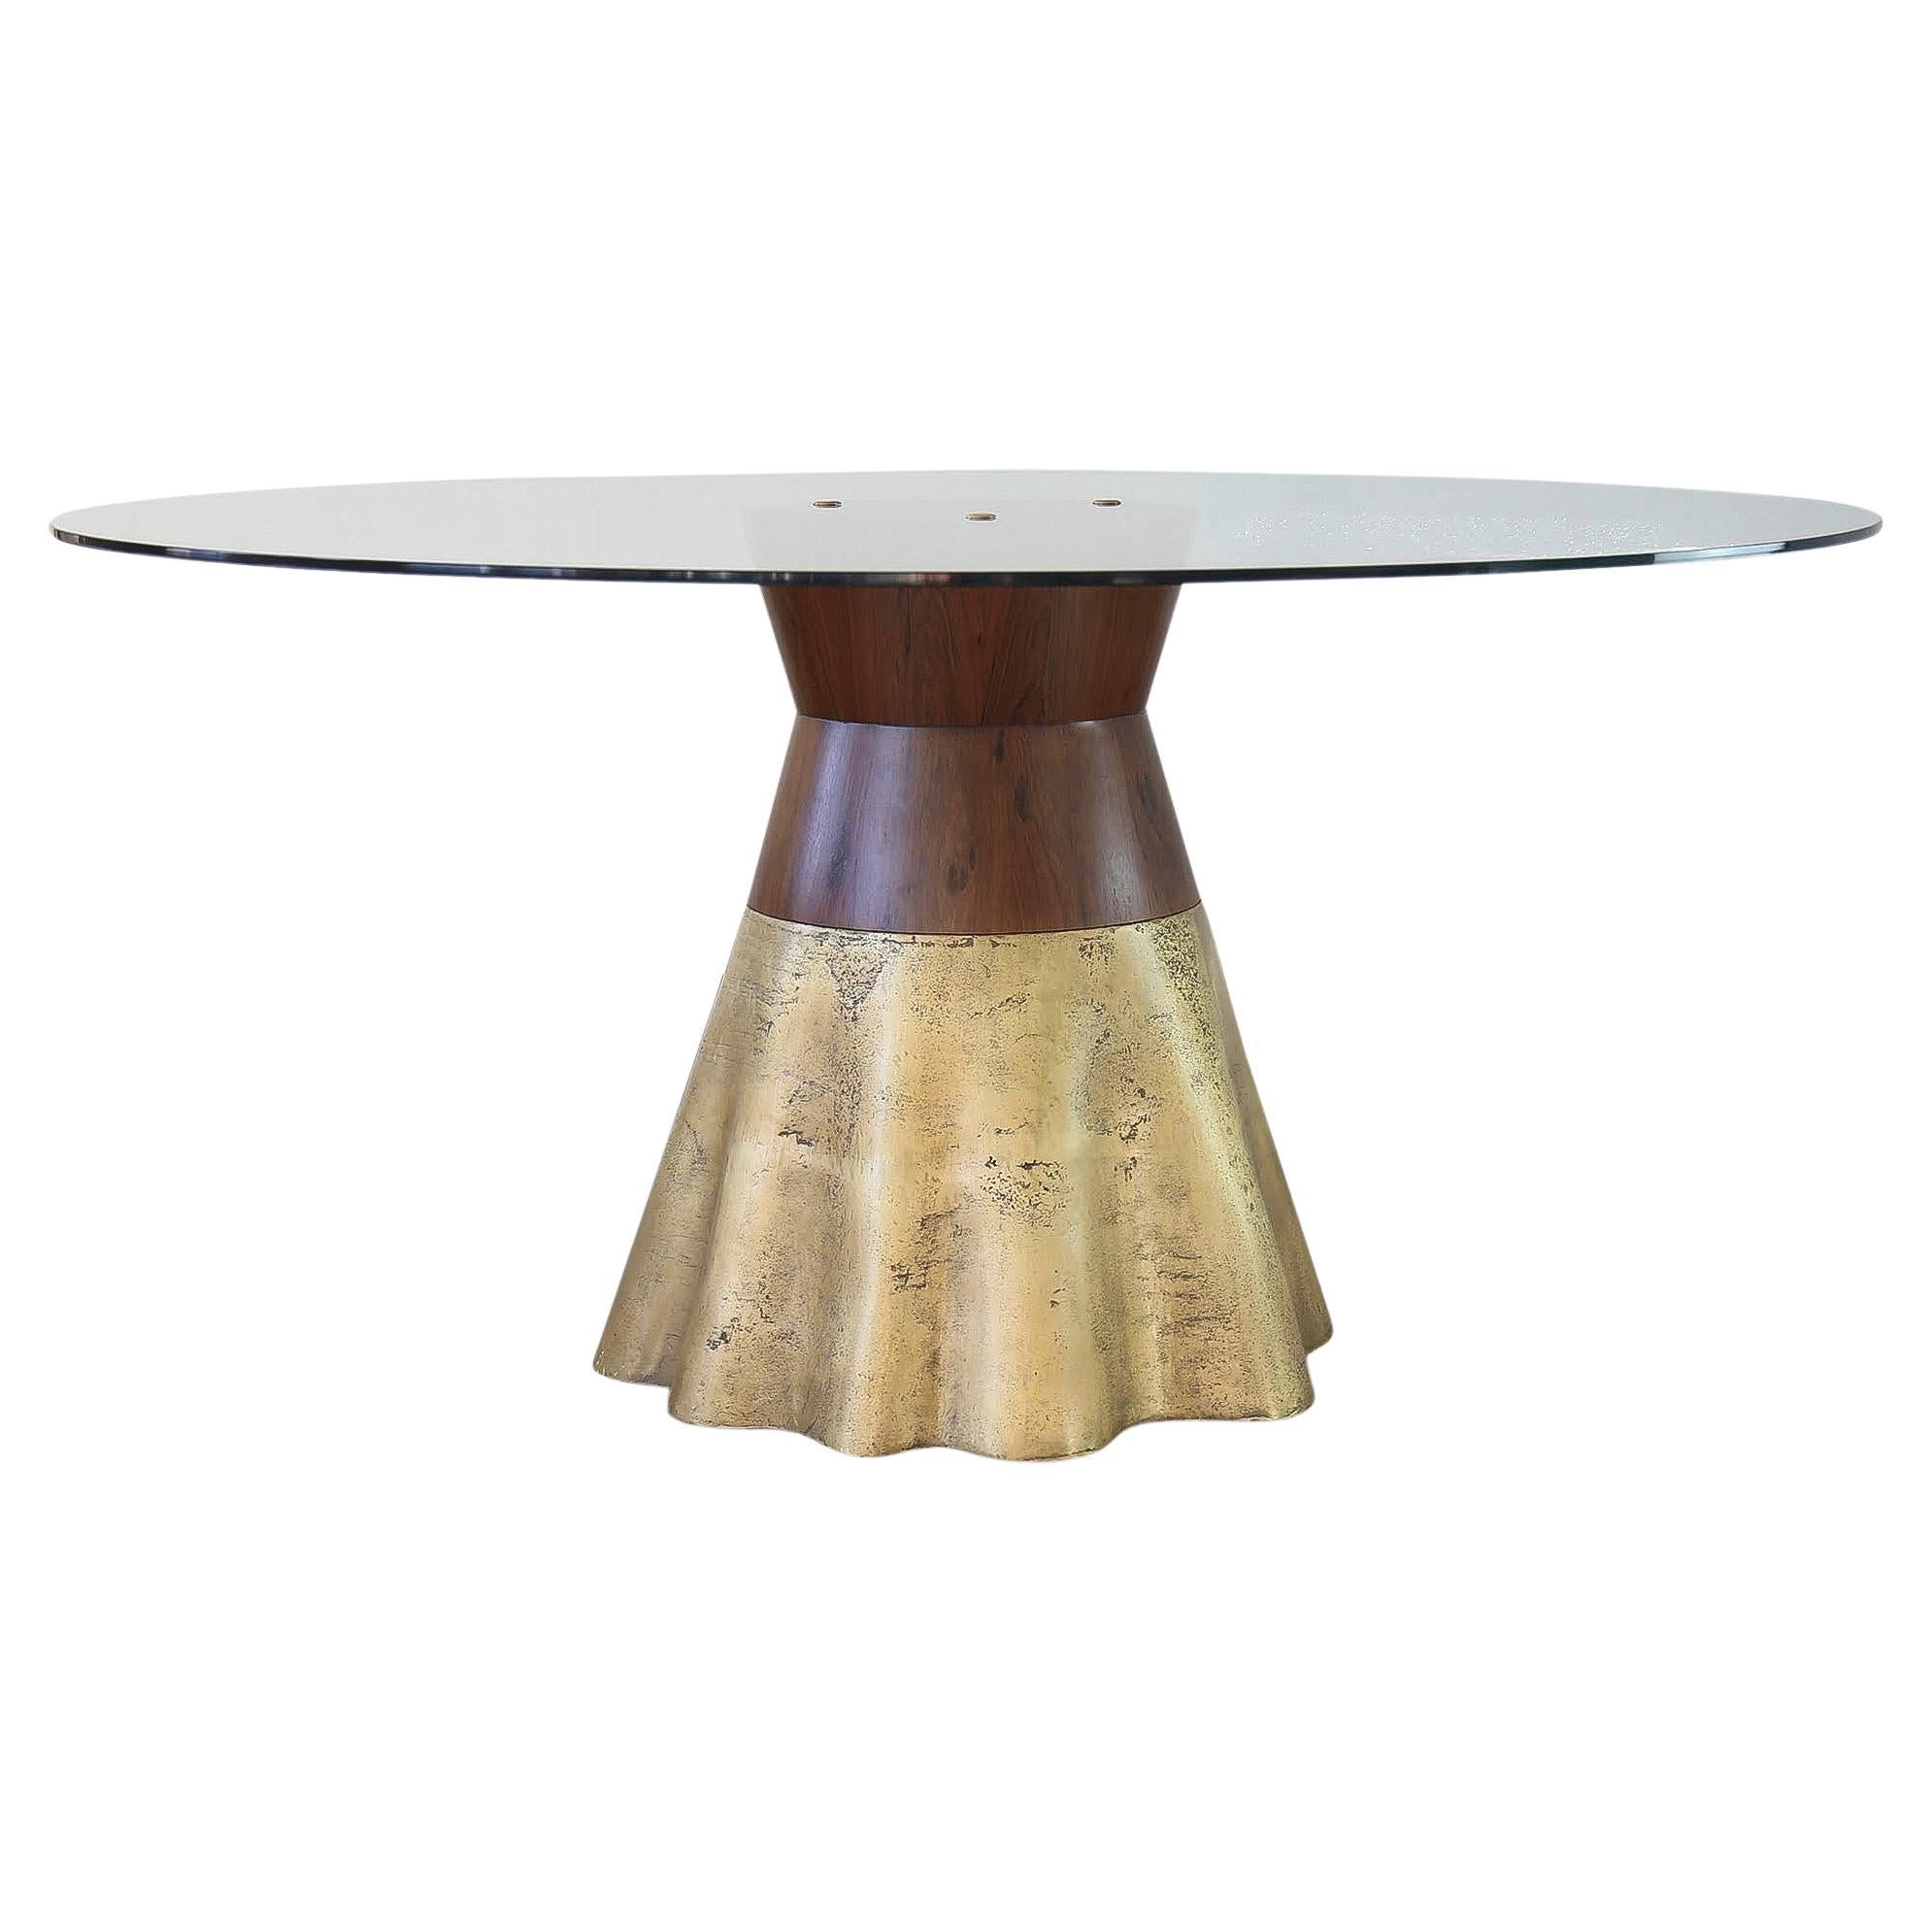 Limited Edition Collectible Cast Bronze and Wood Table by Costantini, Tavola 9 For Sale